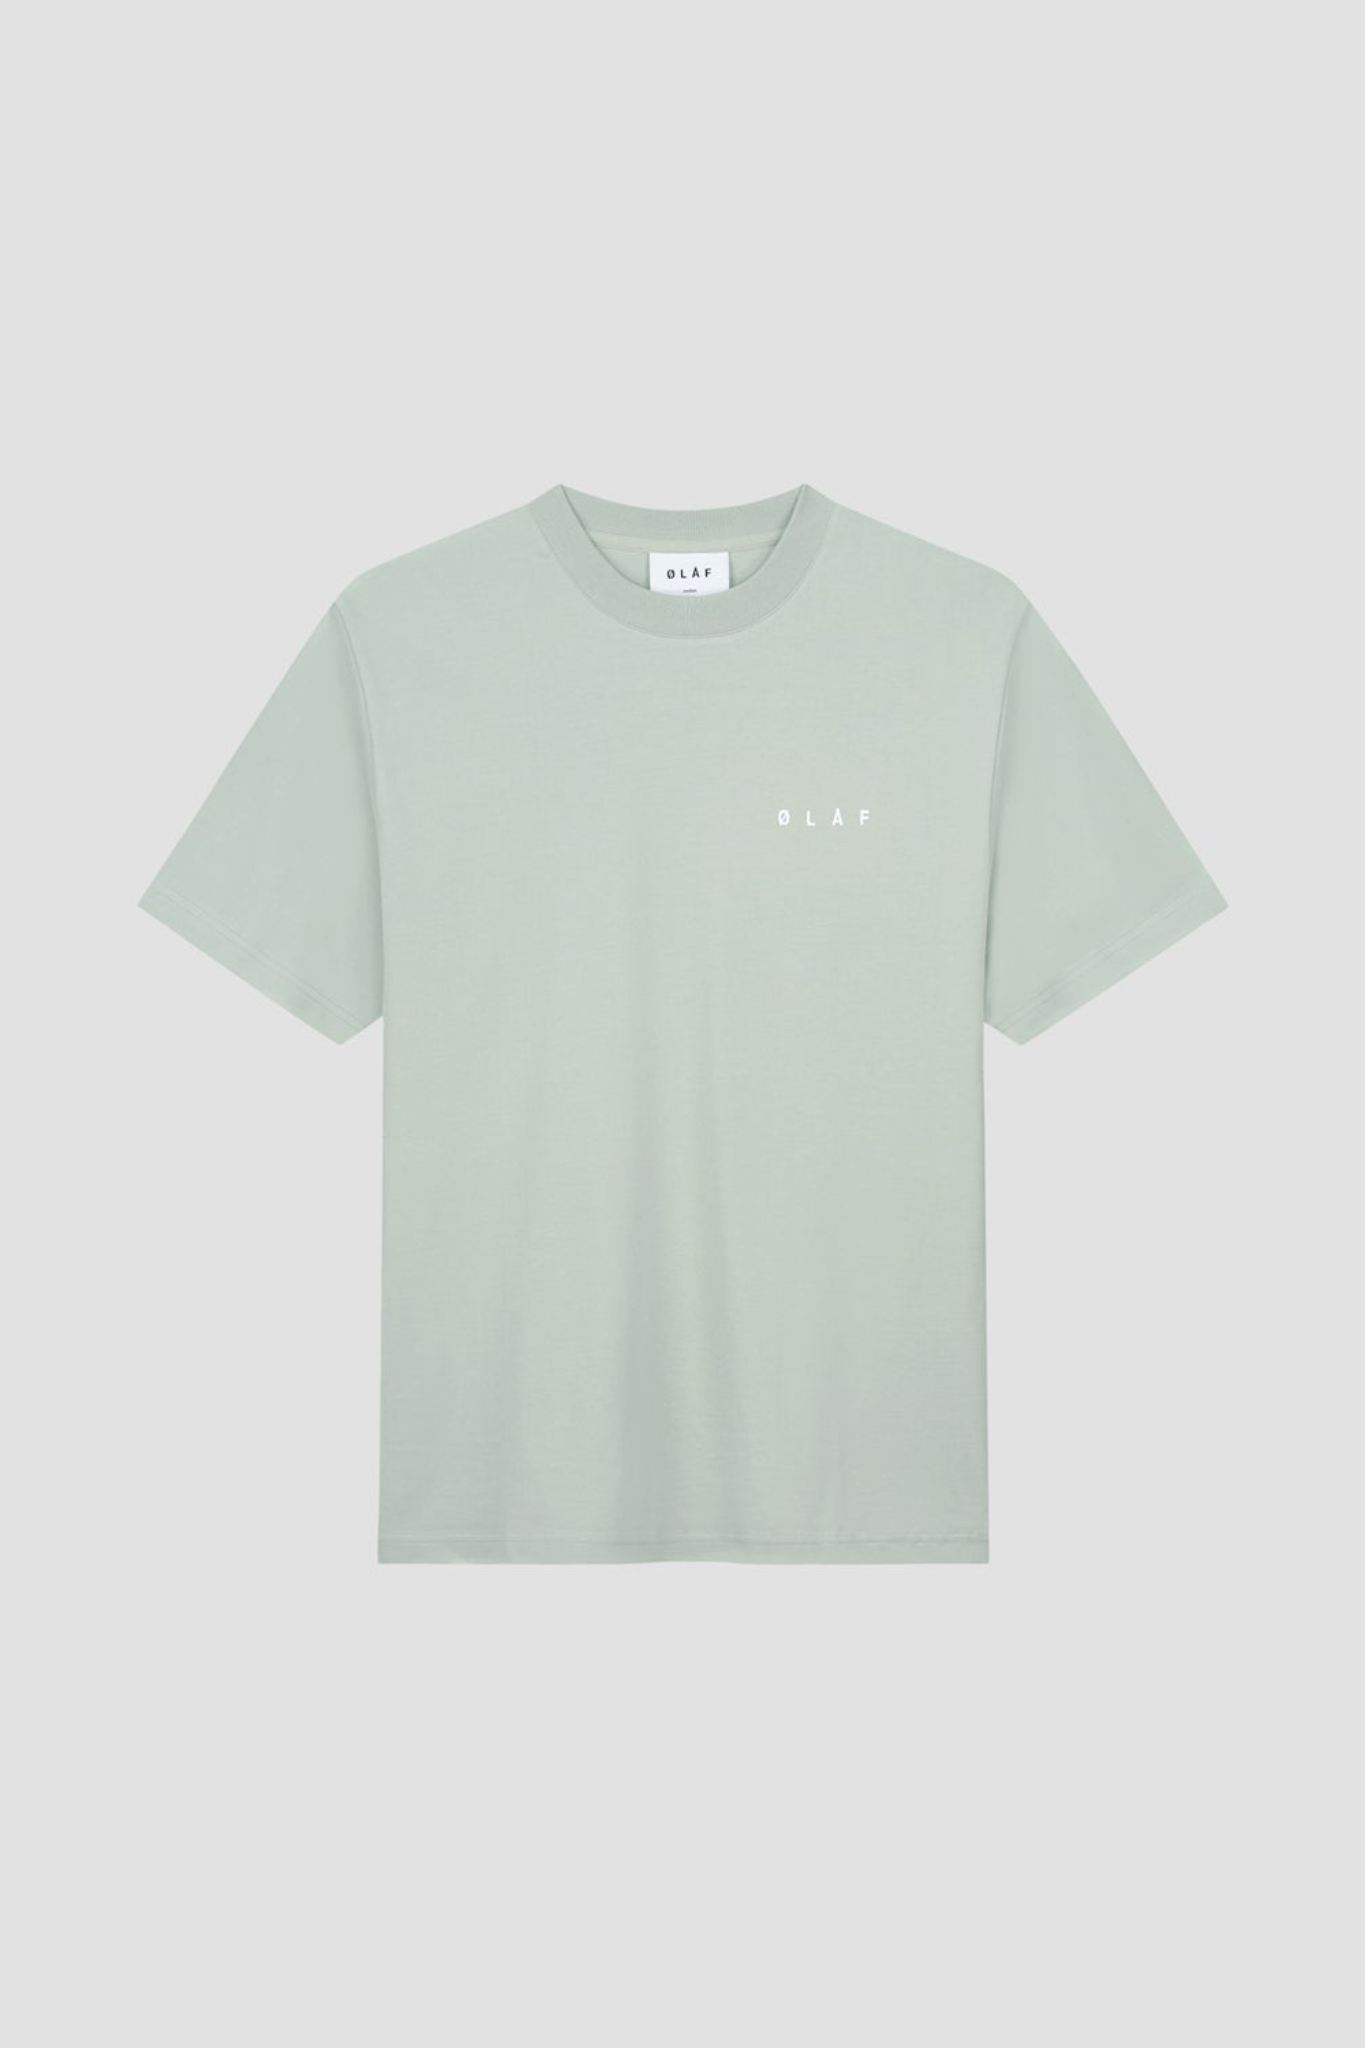 PIXELATED FACE TEE - PALE GREEN